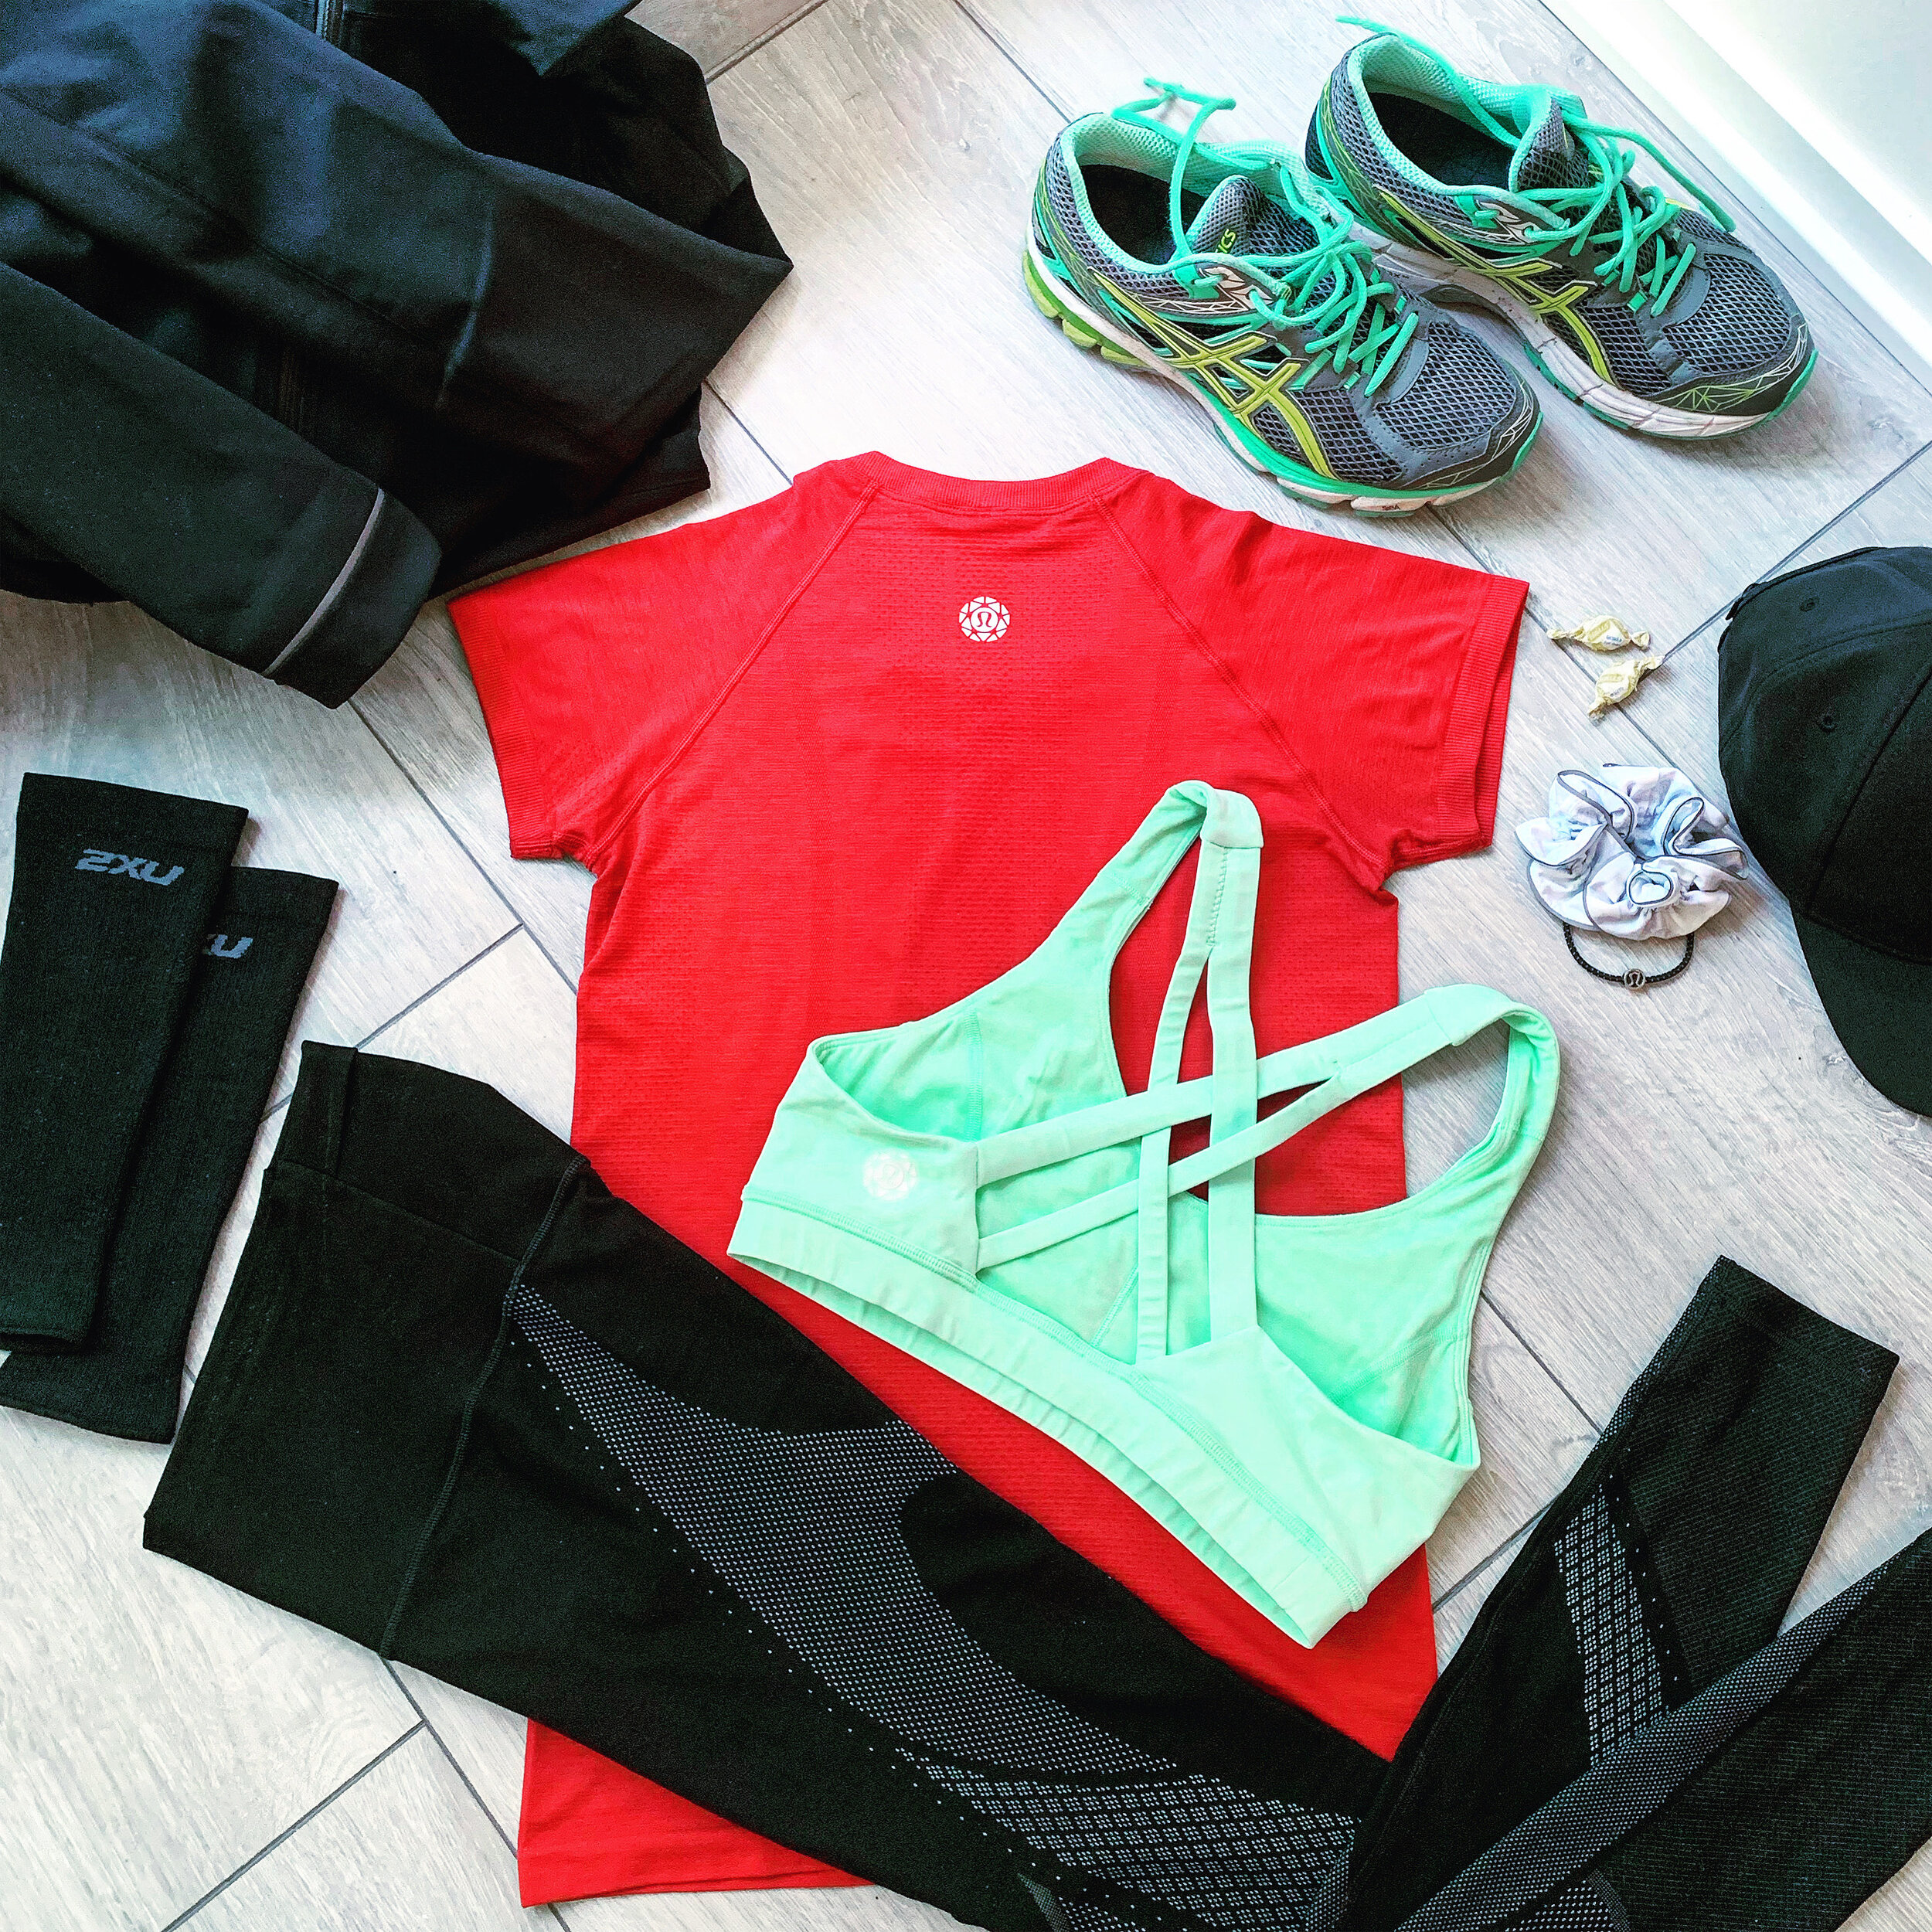 Running Outfits: What to Wear on a Run